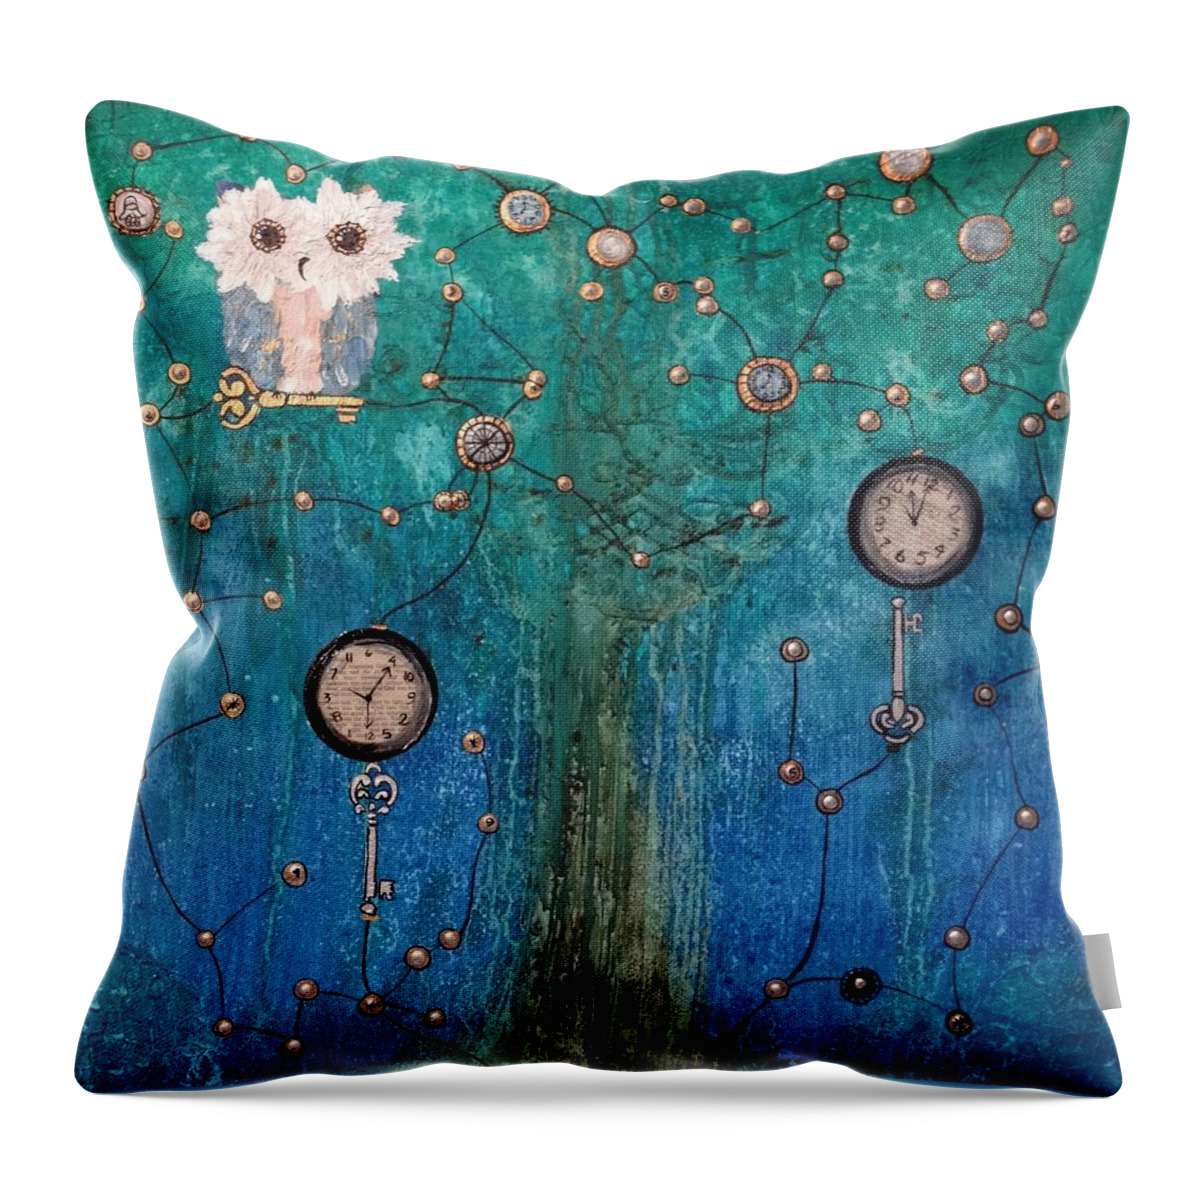 Steampunk Throw Pillow featuring the painting Hoopunked - Steampunked No. 376 by MiMi Stirn